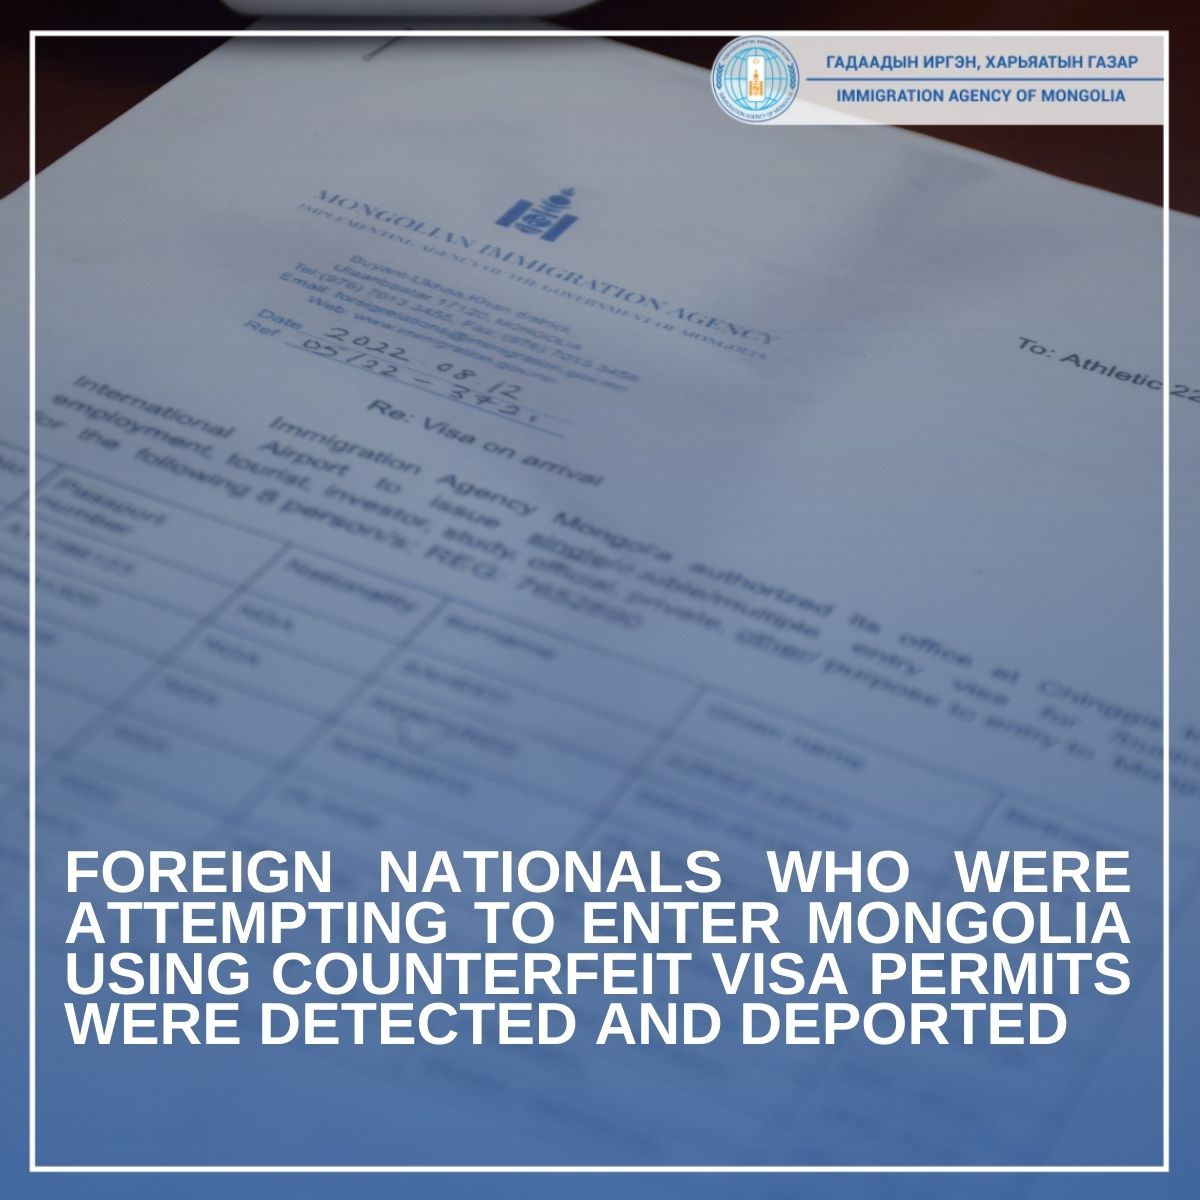 Foreign nationals who were attempting to enter Mongolia using counterfeit visa permits were detected and deported